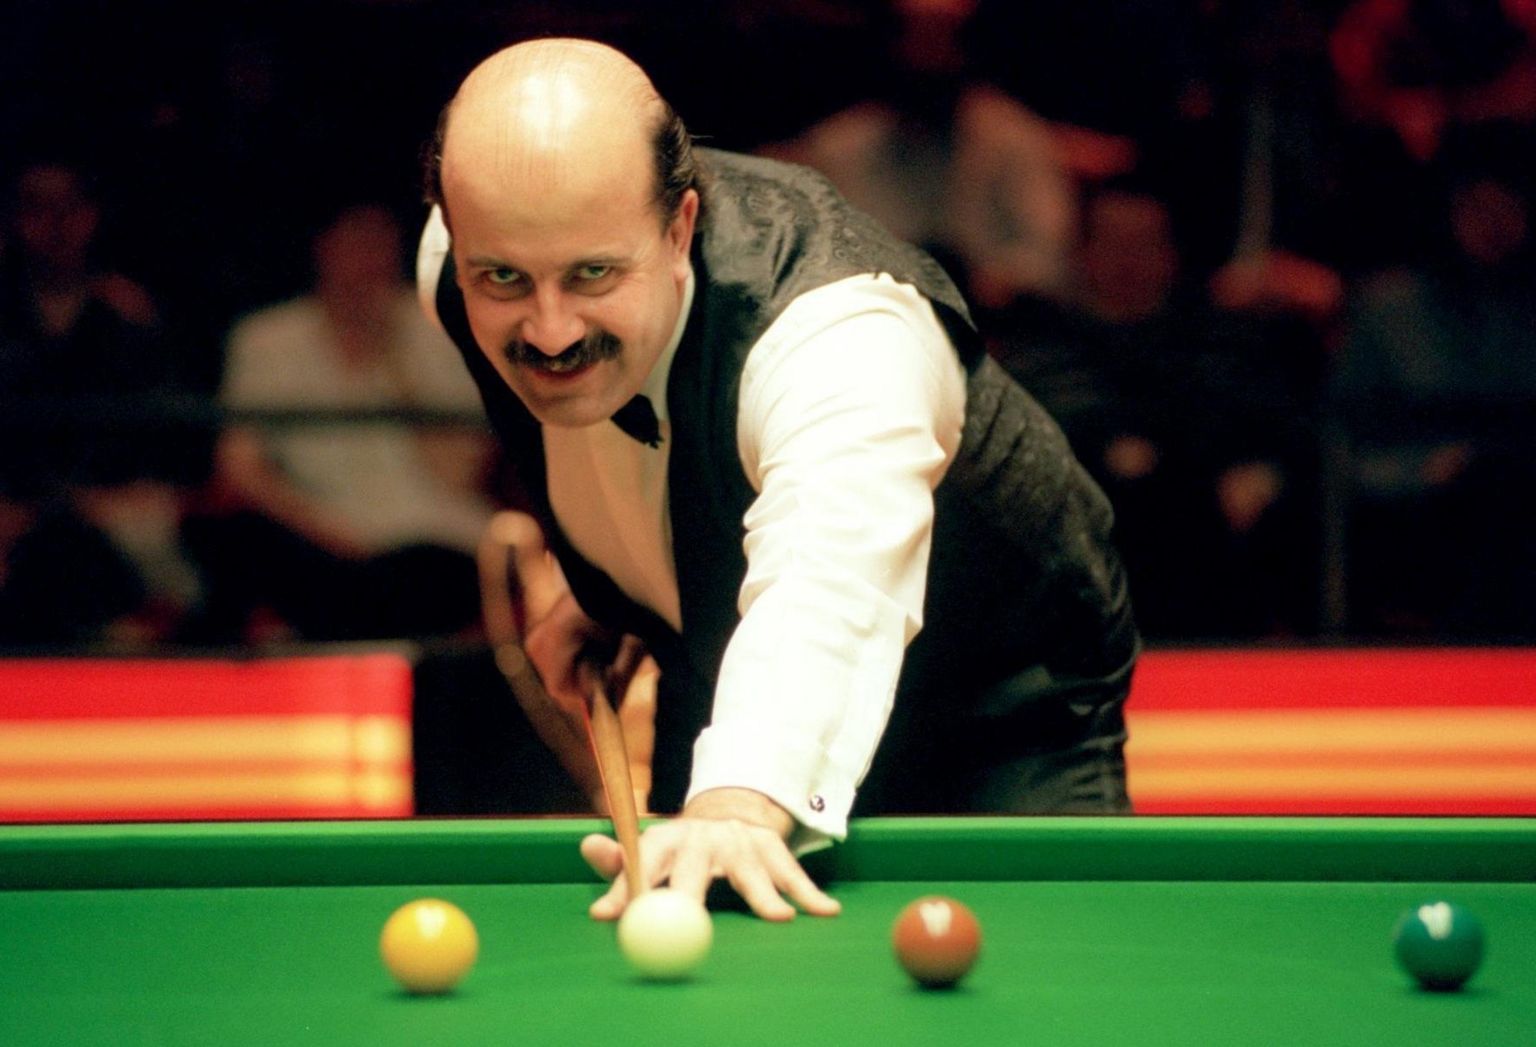 Flats planned for pub where Willie Thorne learned snooker rejected